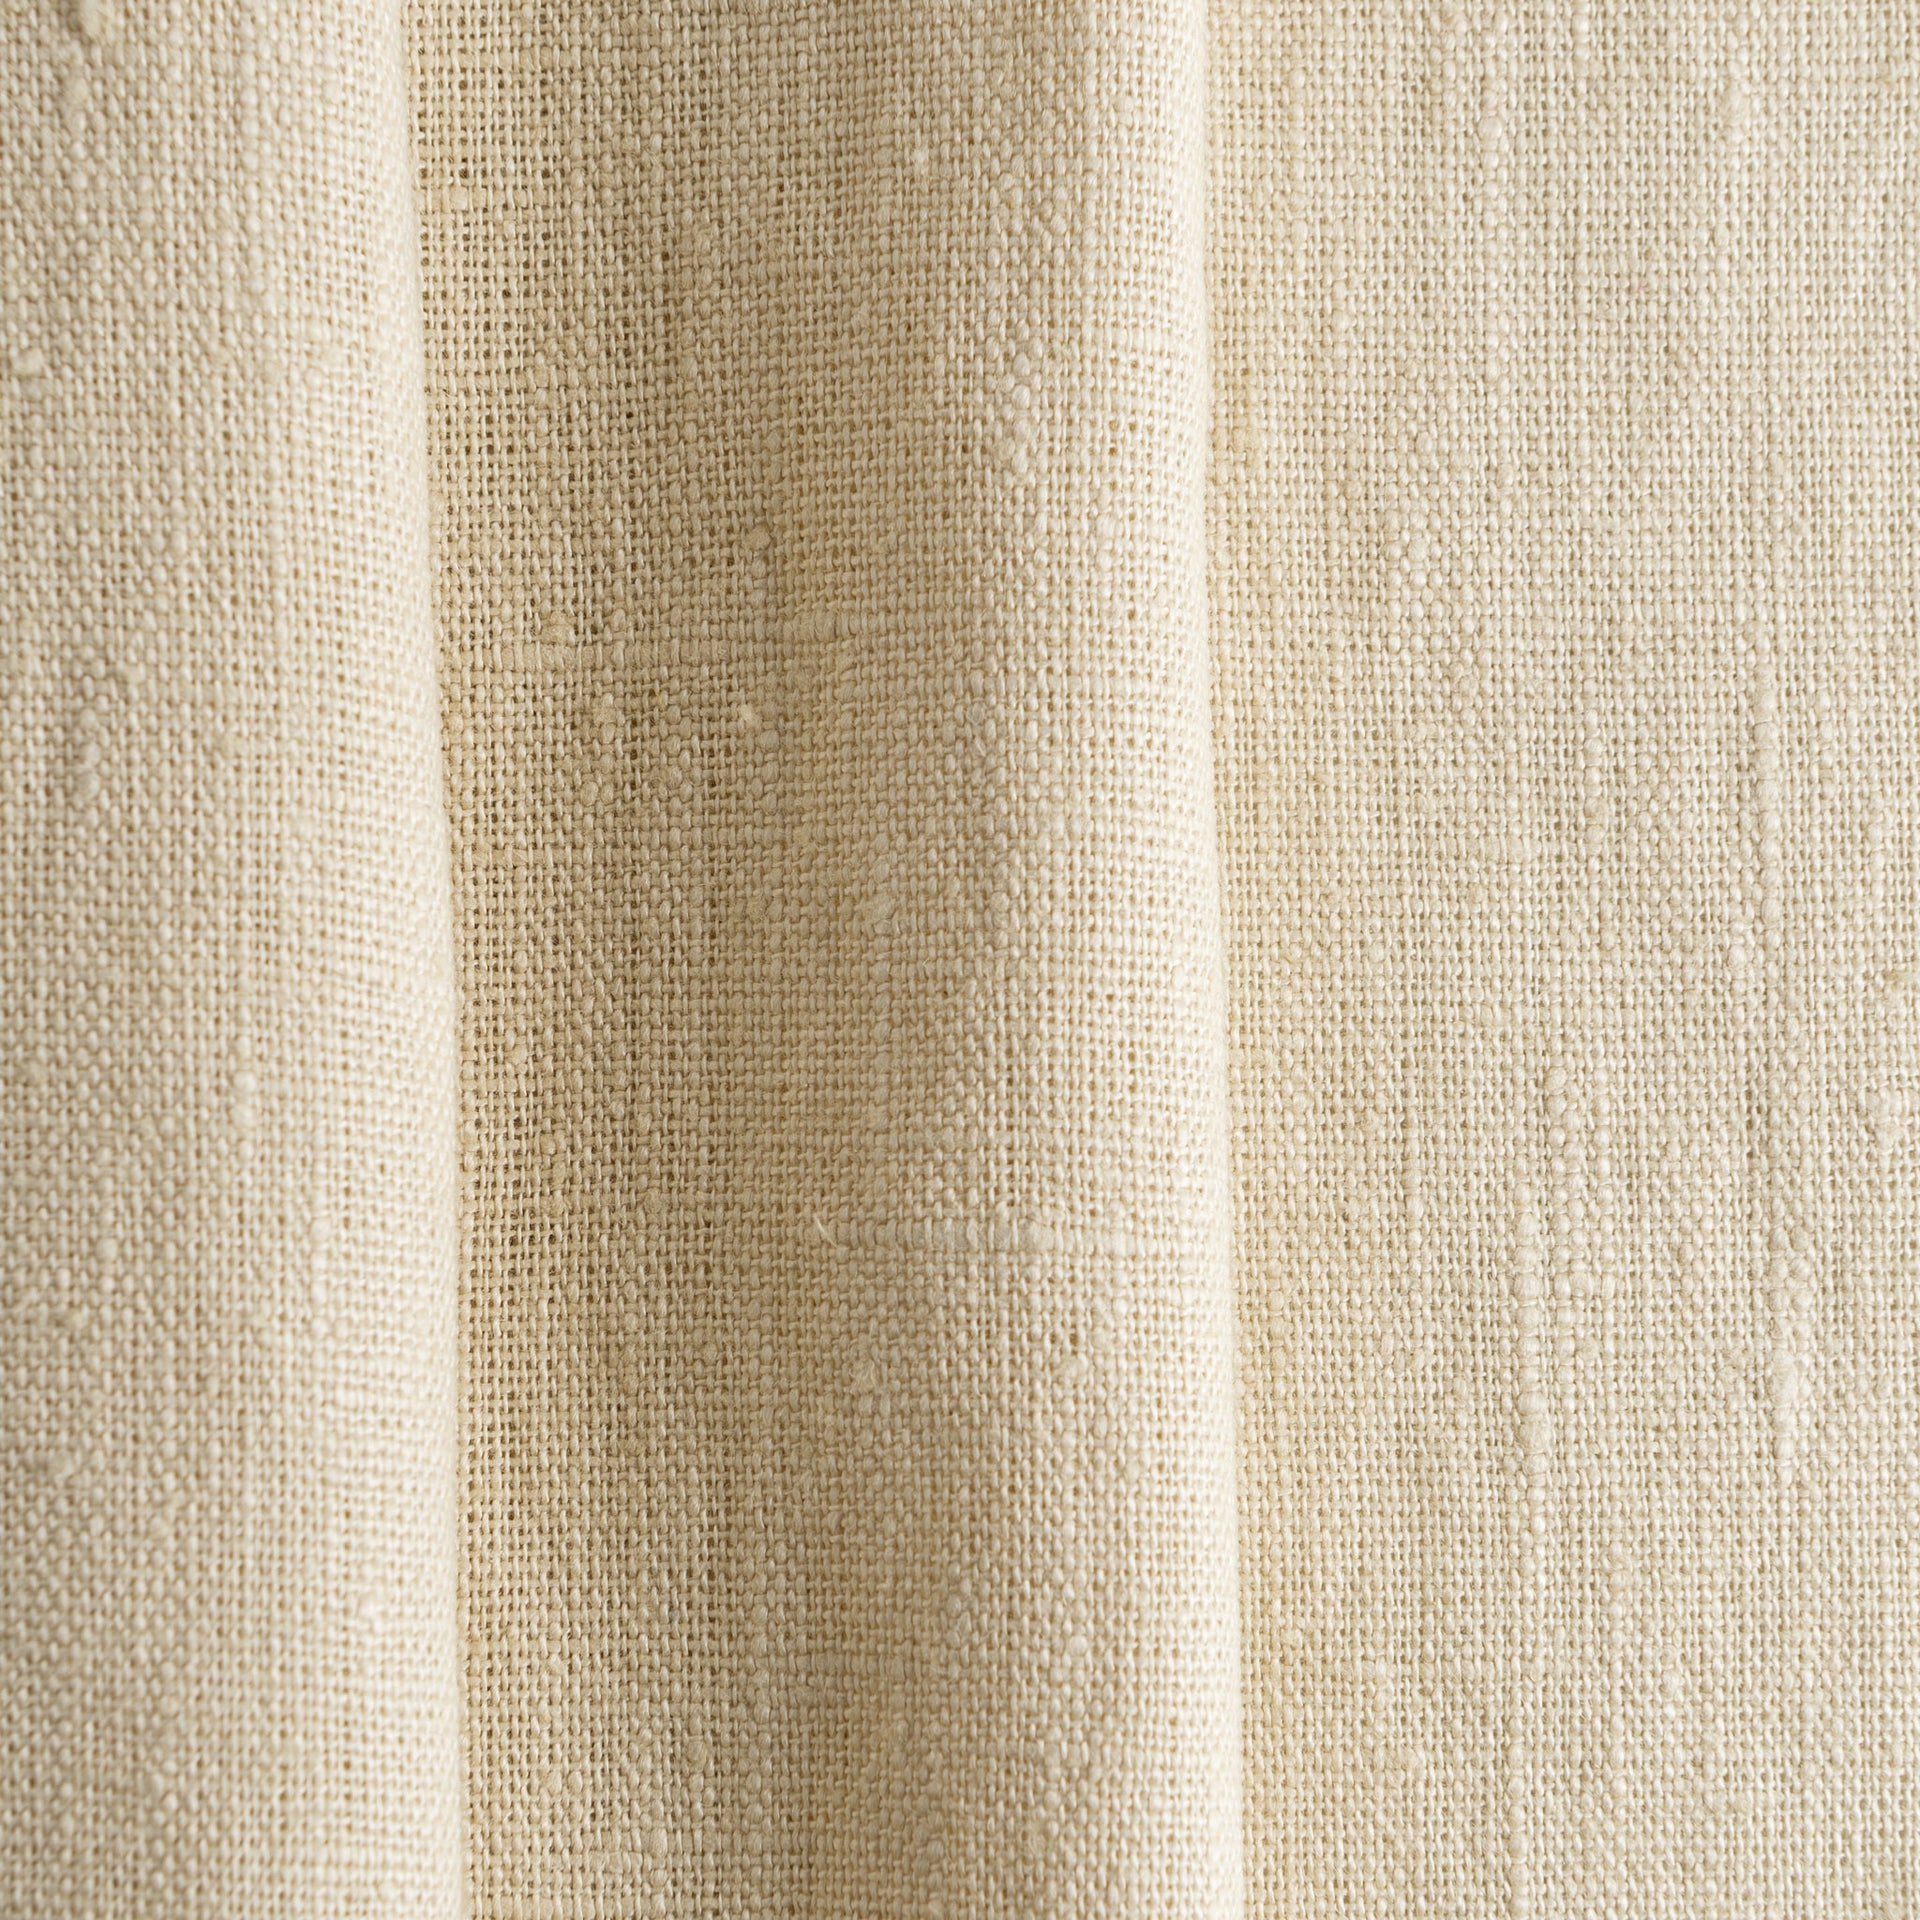 Ecru Heavy Weight Linen Fabric by the Yard - 100% French Natural - Width 52”